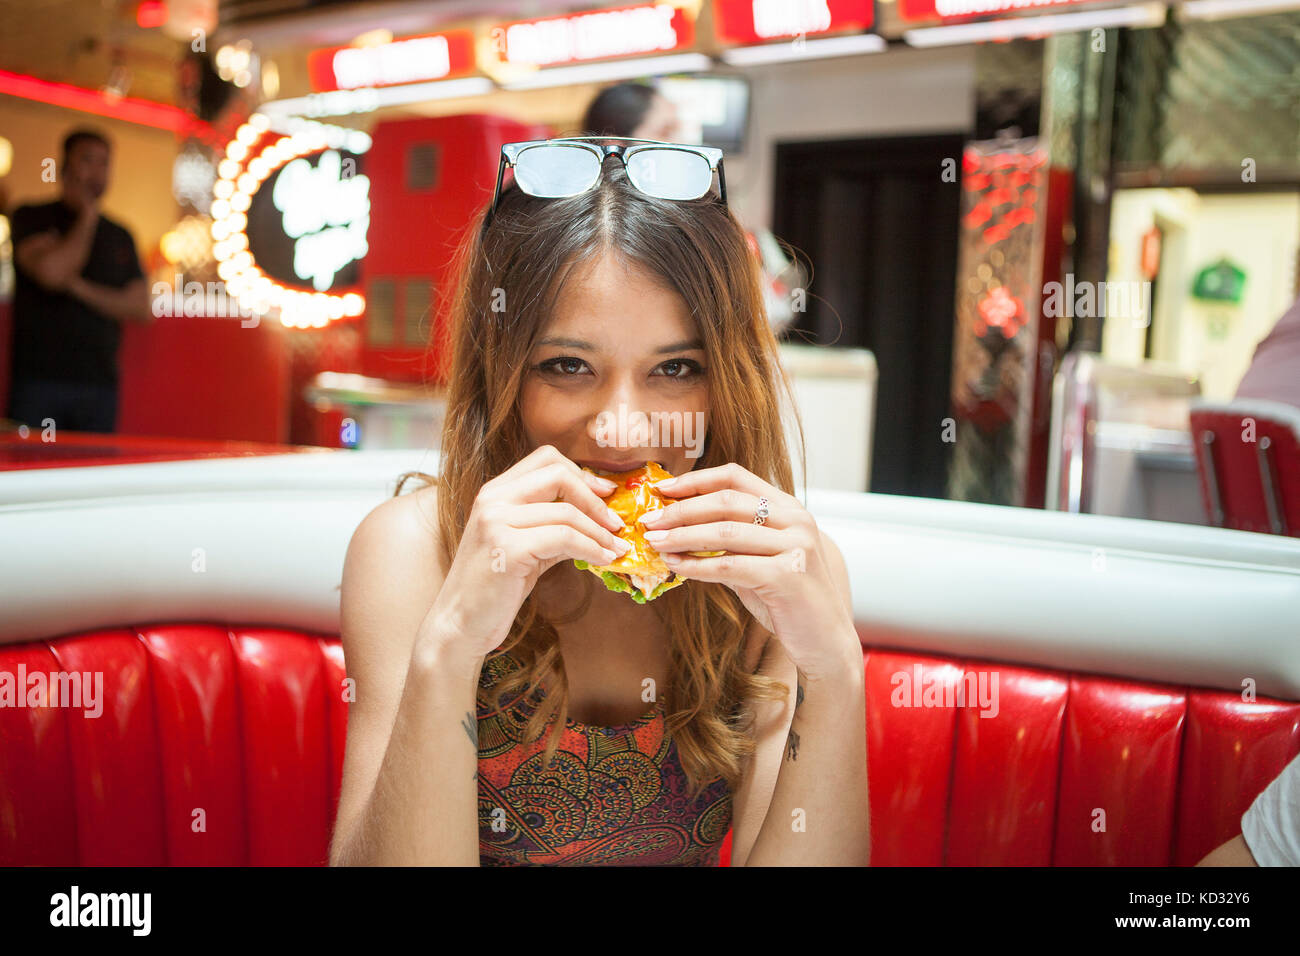 Portrait of young woman sitting in diner, eating sandwich Banque D'Images